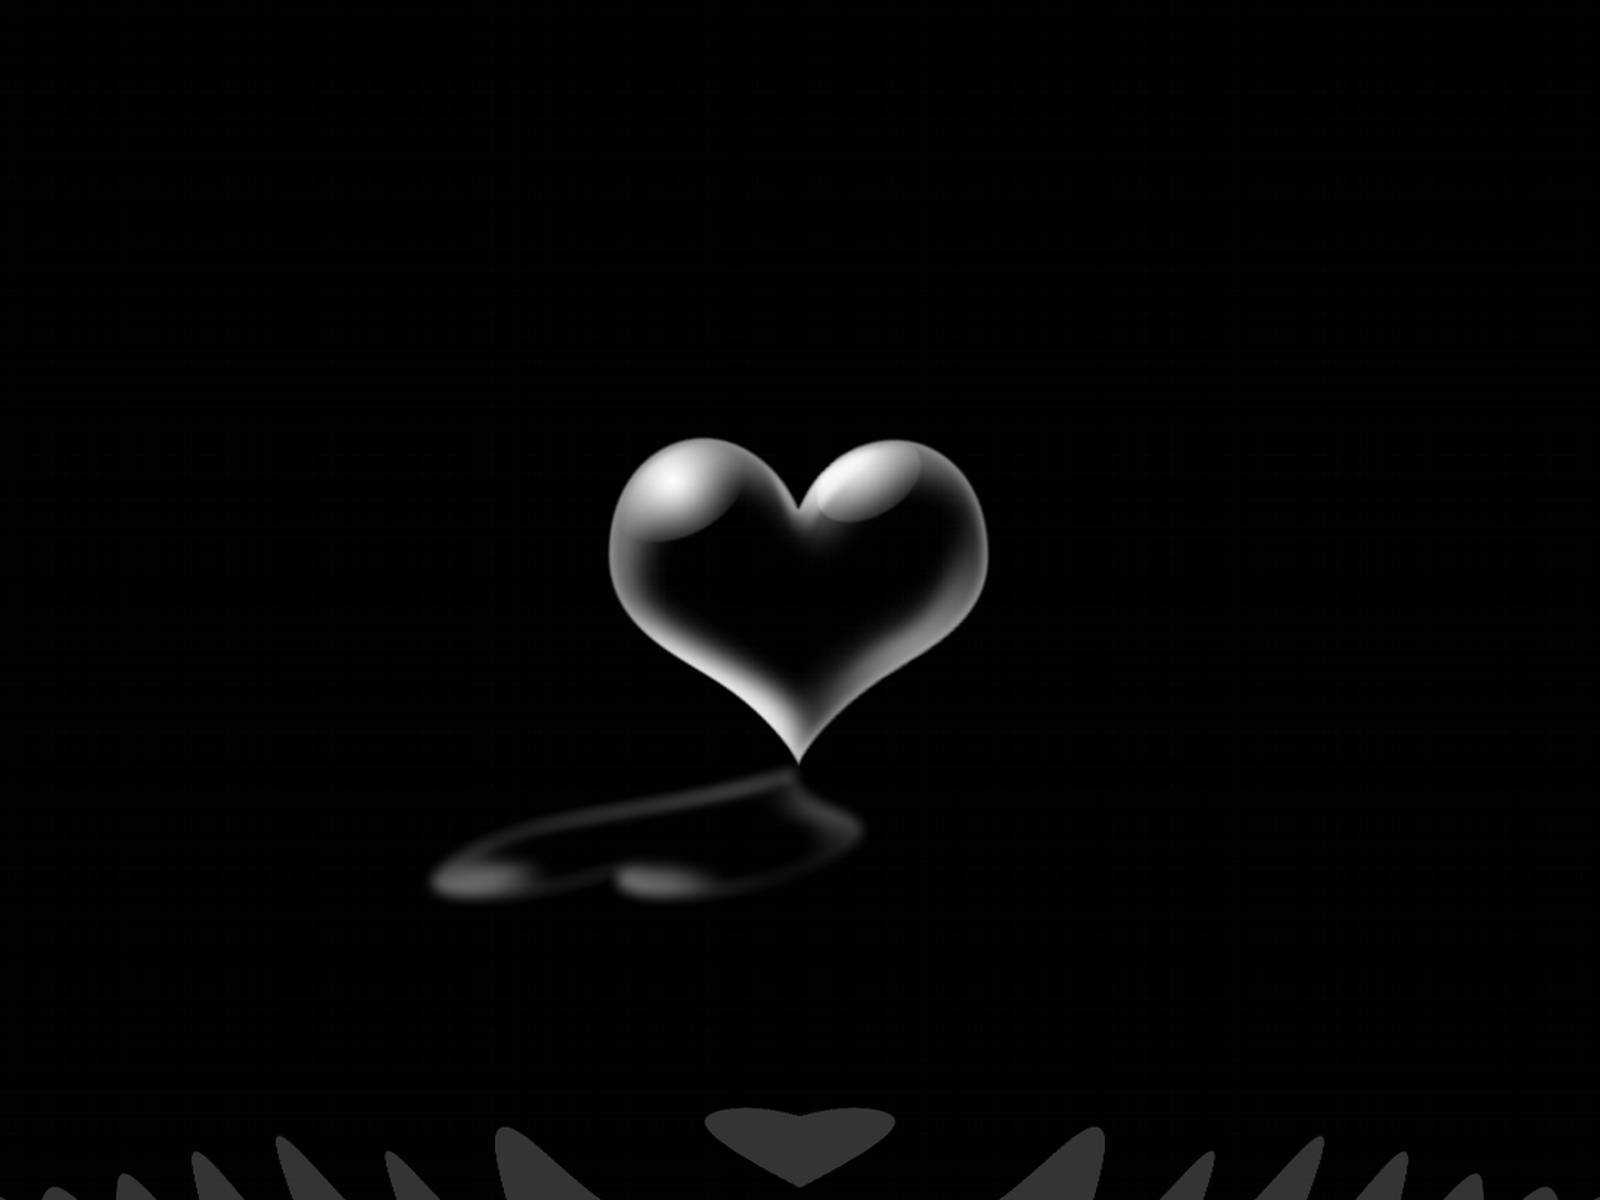 Download Love Black And White 3d Heart Wallpaper 